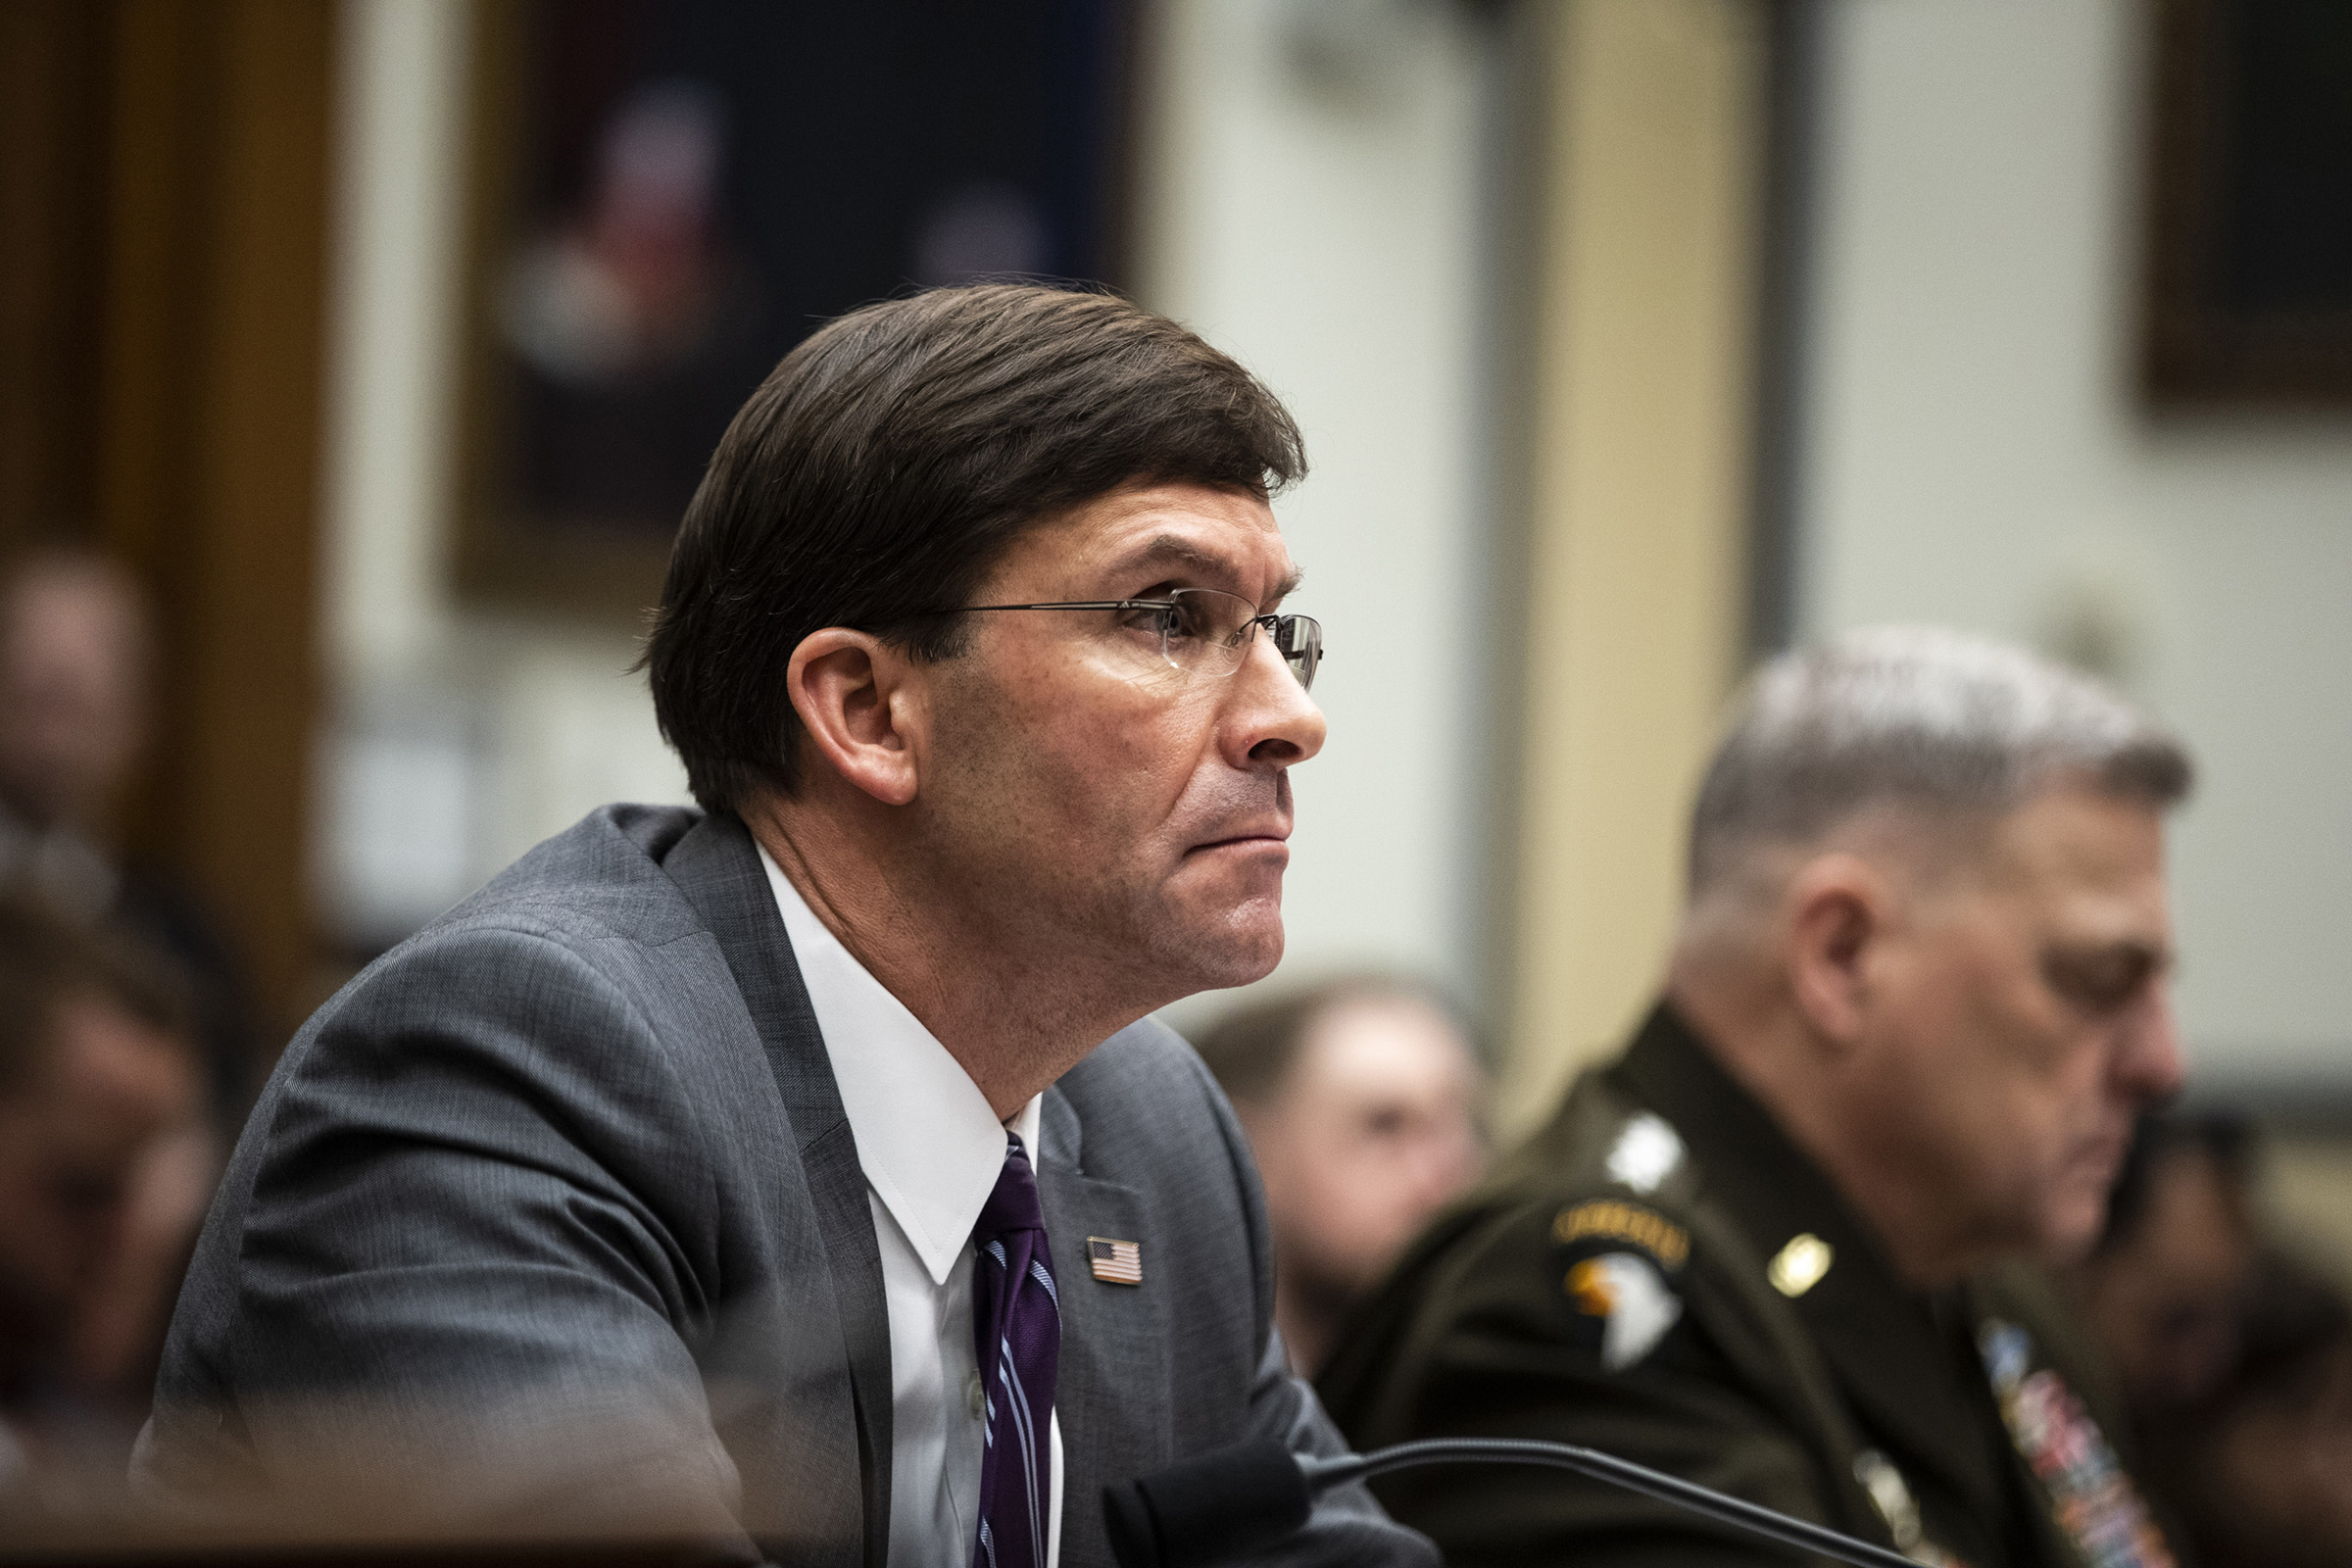 Defense Secretary Mark Esper, left, and Gen. Mark Milley, chairman of the Joint Chiefs of Staff, appear before the House Armed Services Committee in Washington on Feb. 26, 2020.  (Anna Moneymaker/The New York Times)